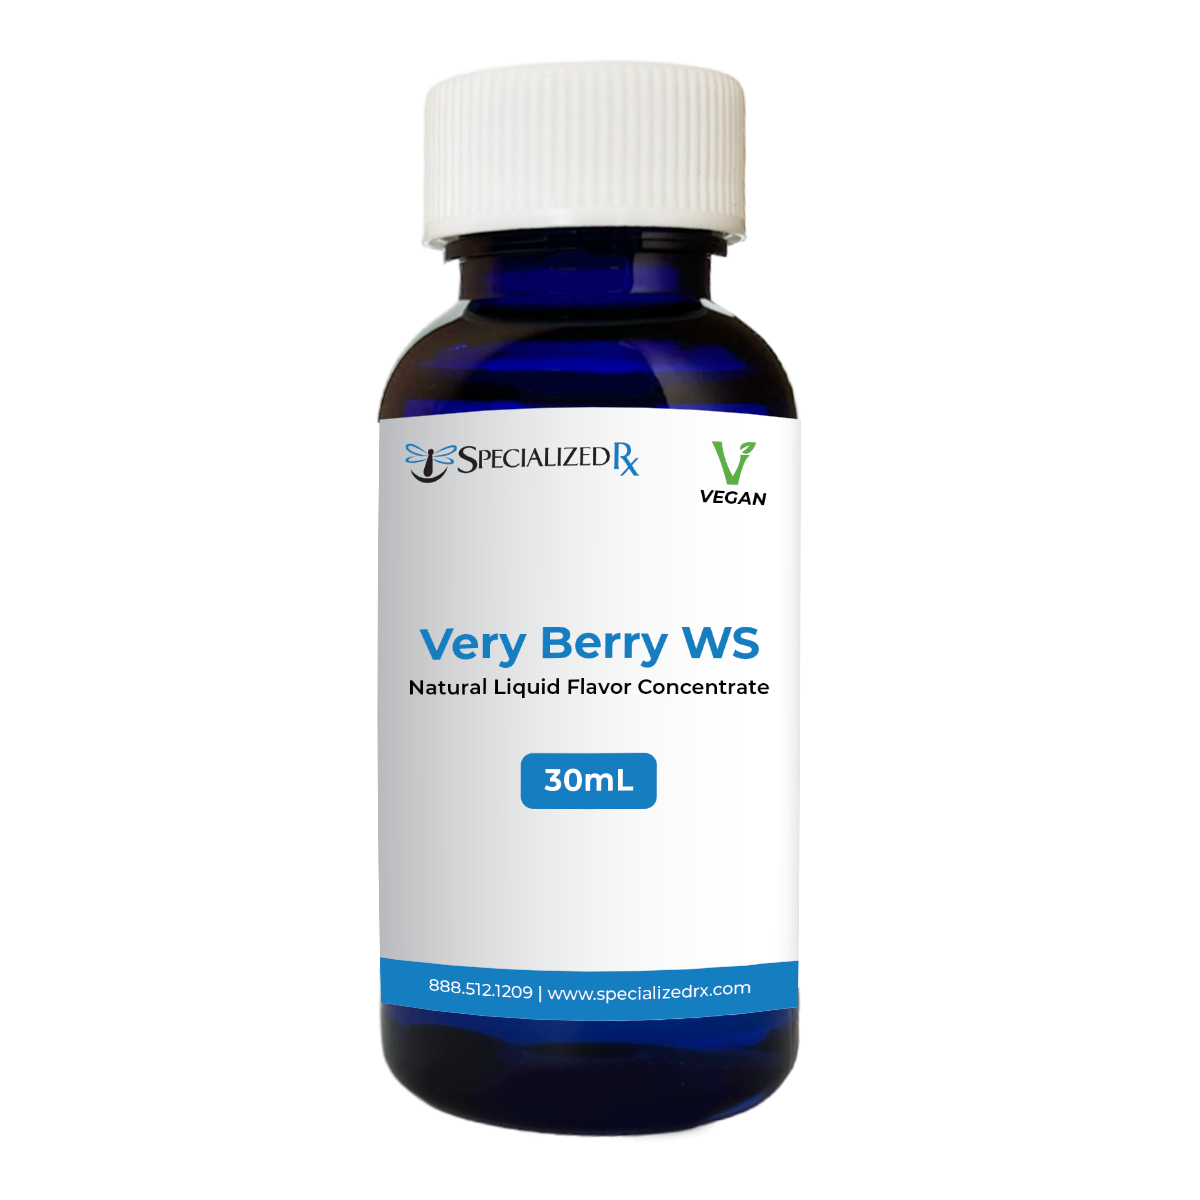 Very Berry WS Natural Liquid Flavor Concentrate